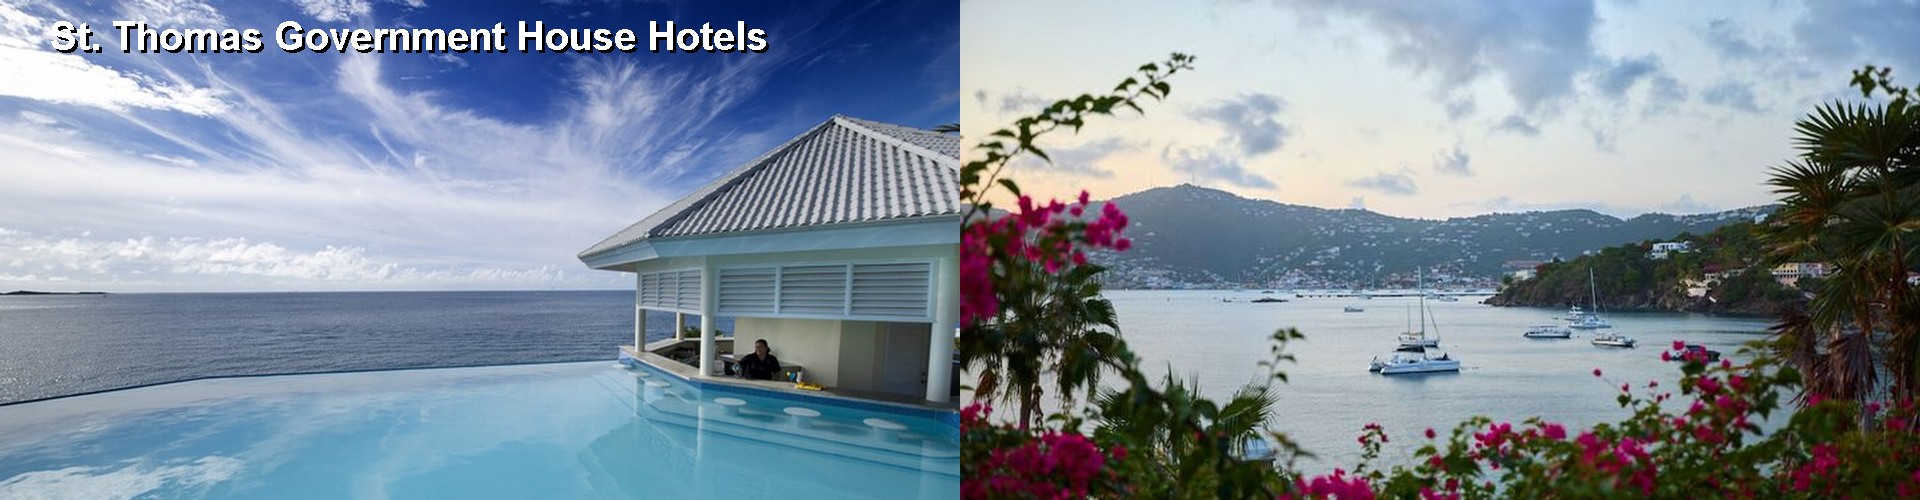 4 Best Hotels near St. Thomas Government House